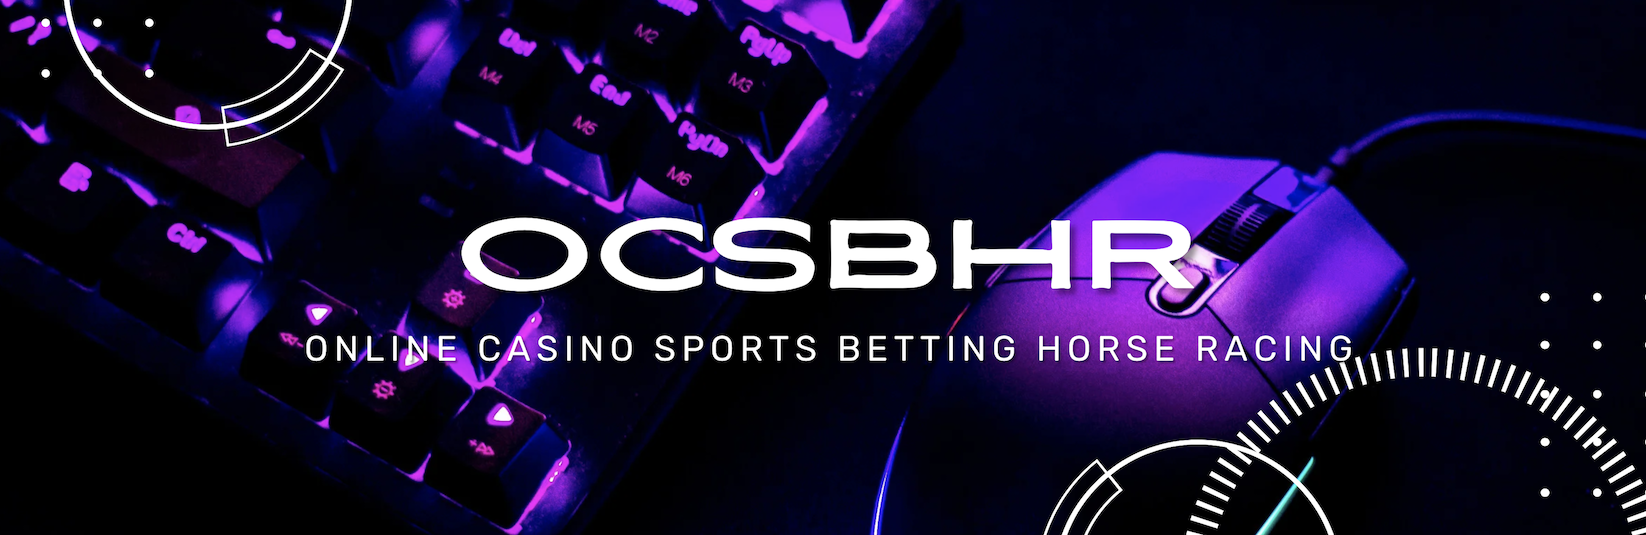 This Month's Bonuses and Promotions for Online Casino Sports Betting Horse Racing